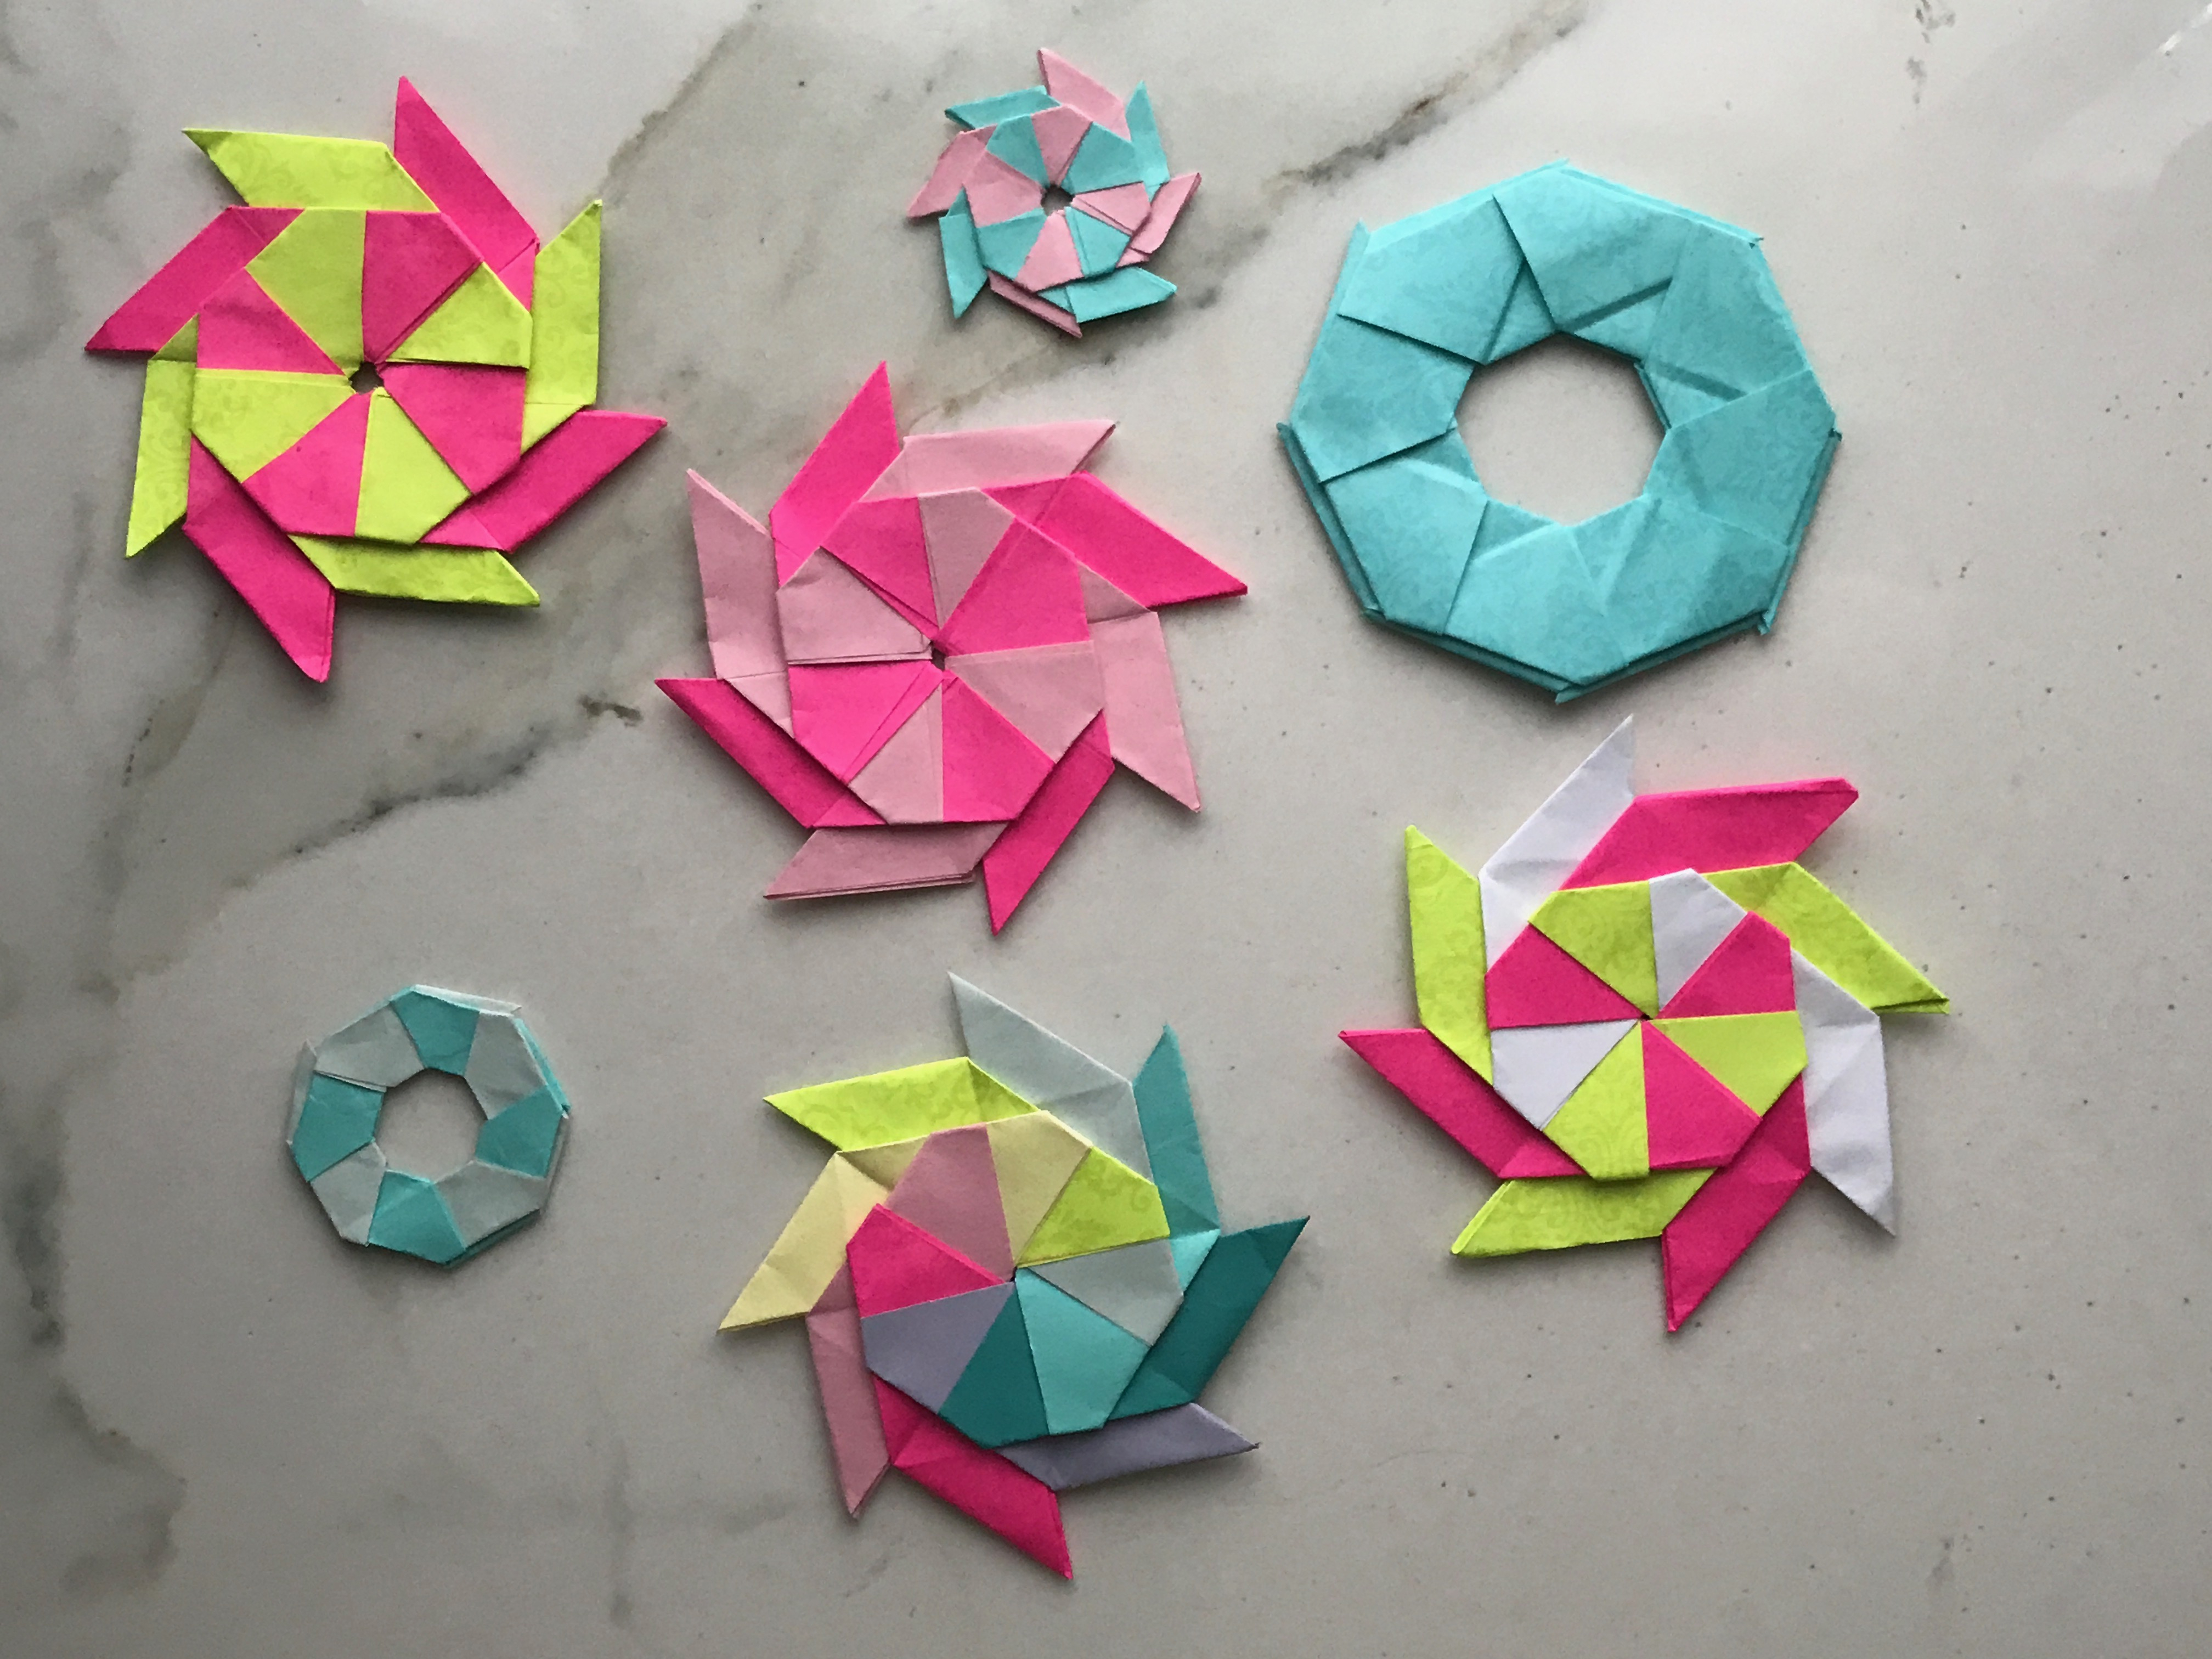 Origami Star How To How To Fold An Origami Star And Be On Trend With The Kids Between